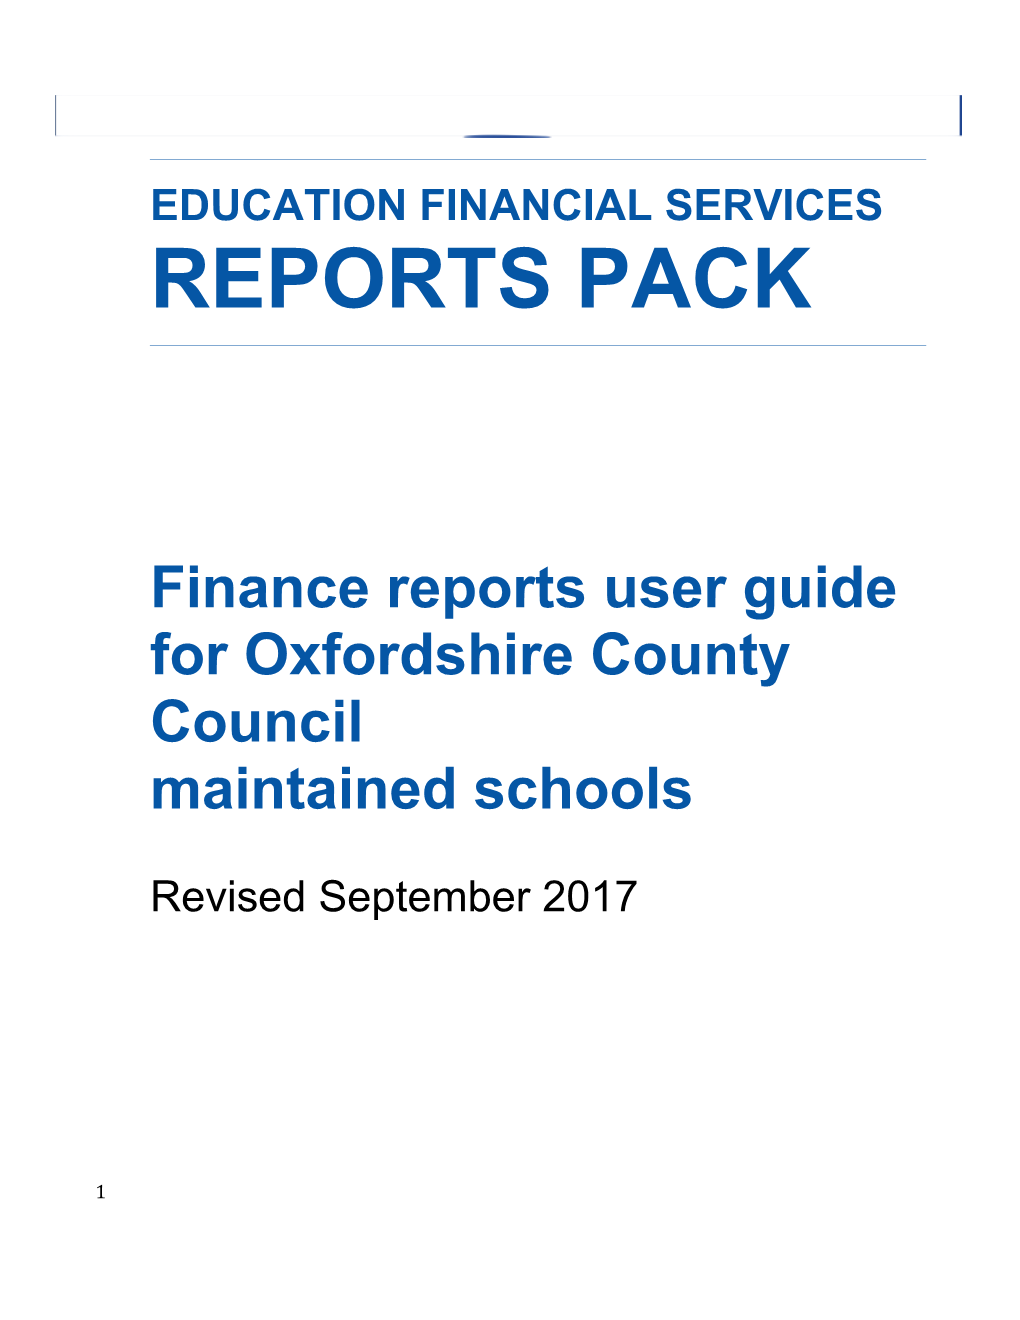 Finance Reports User Guide for Oxfordshire County Council